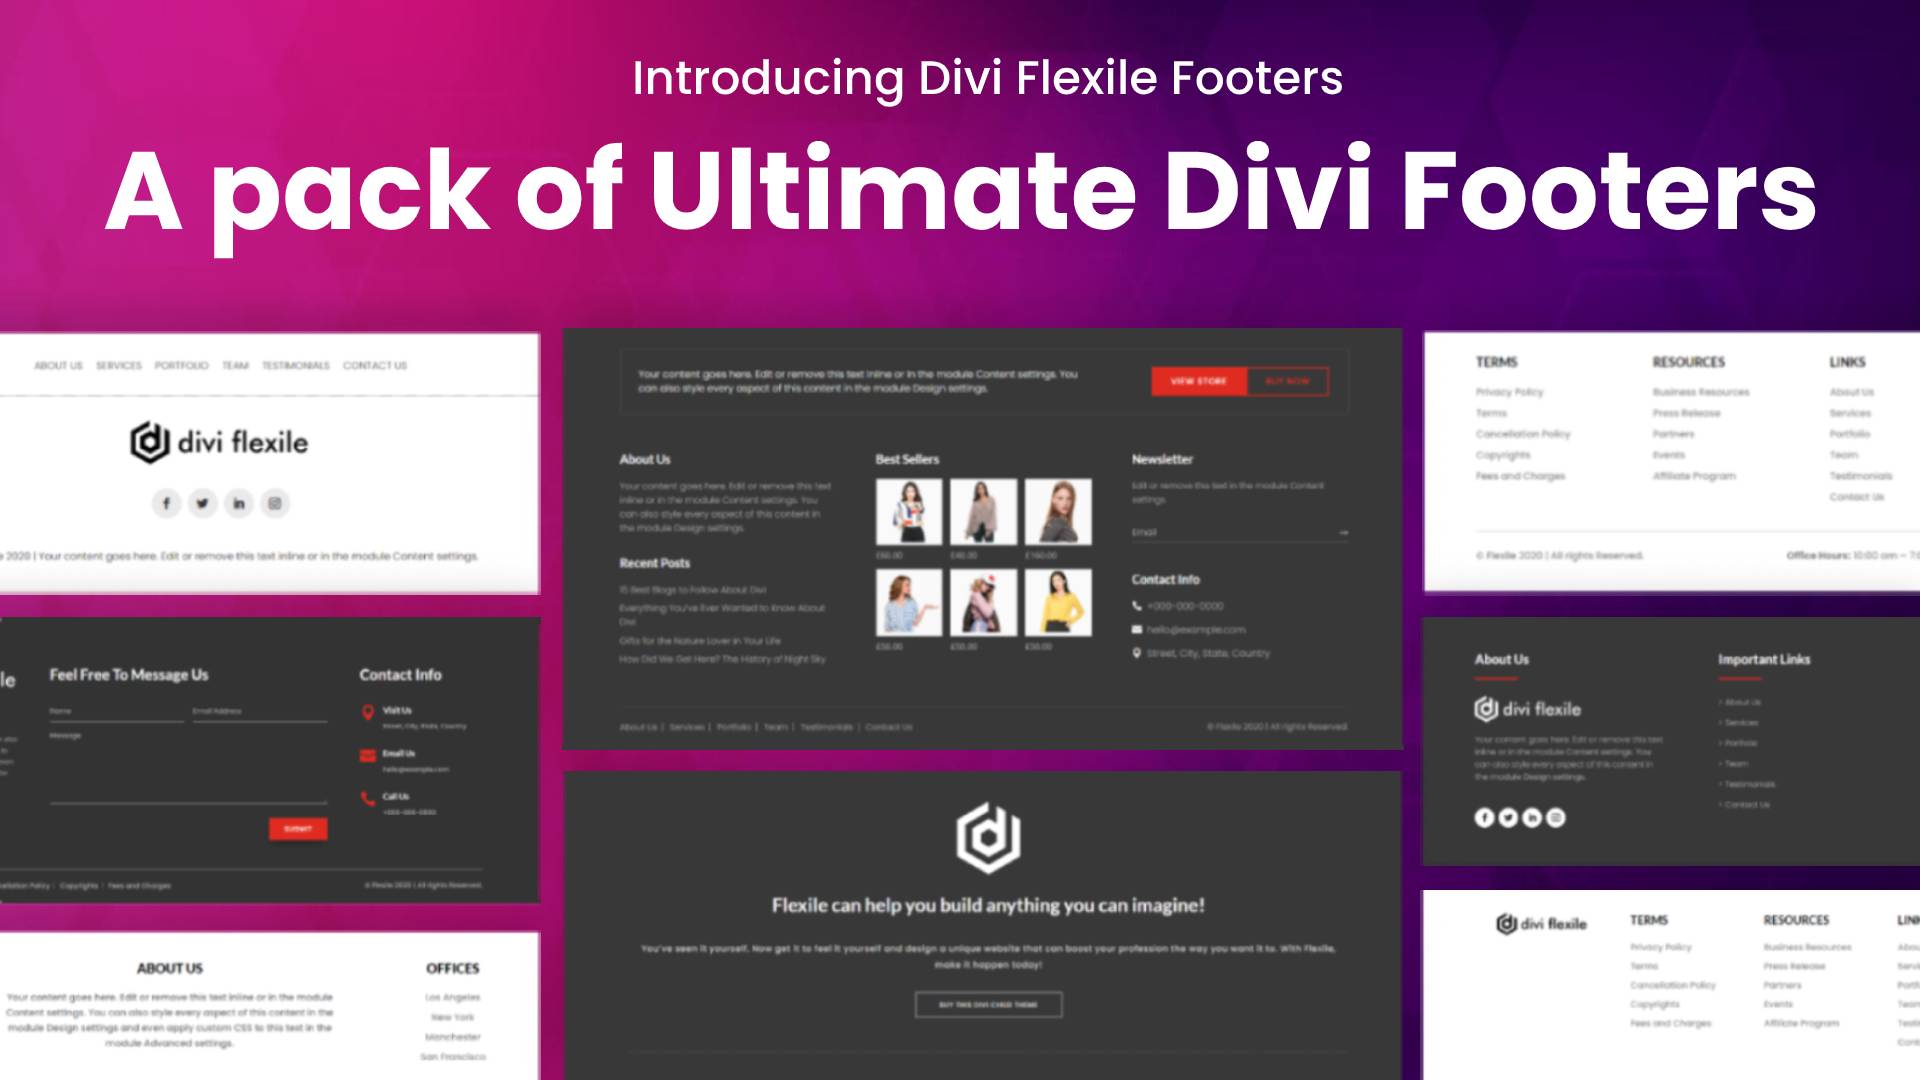 Divi Flexile Footers introductory blog post